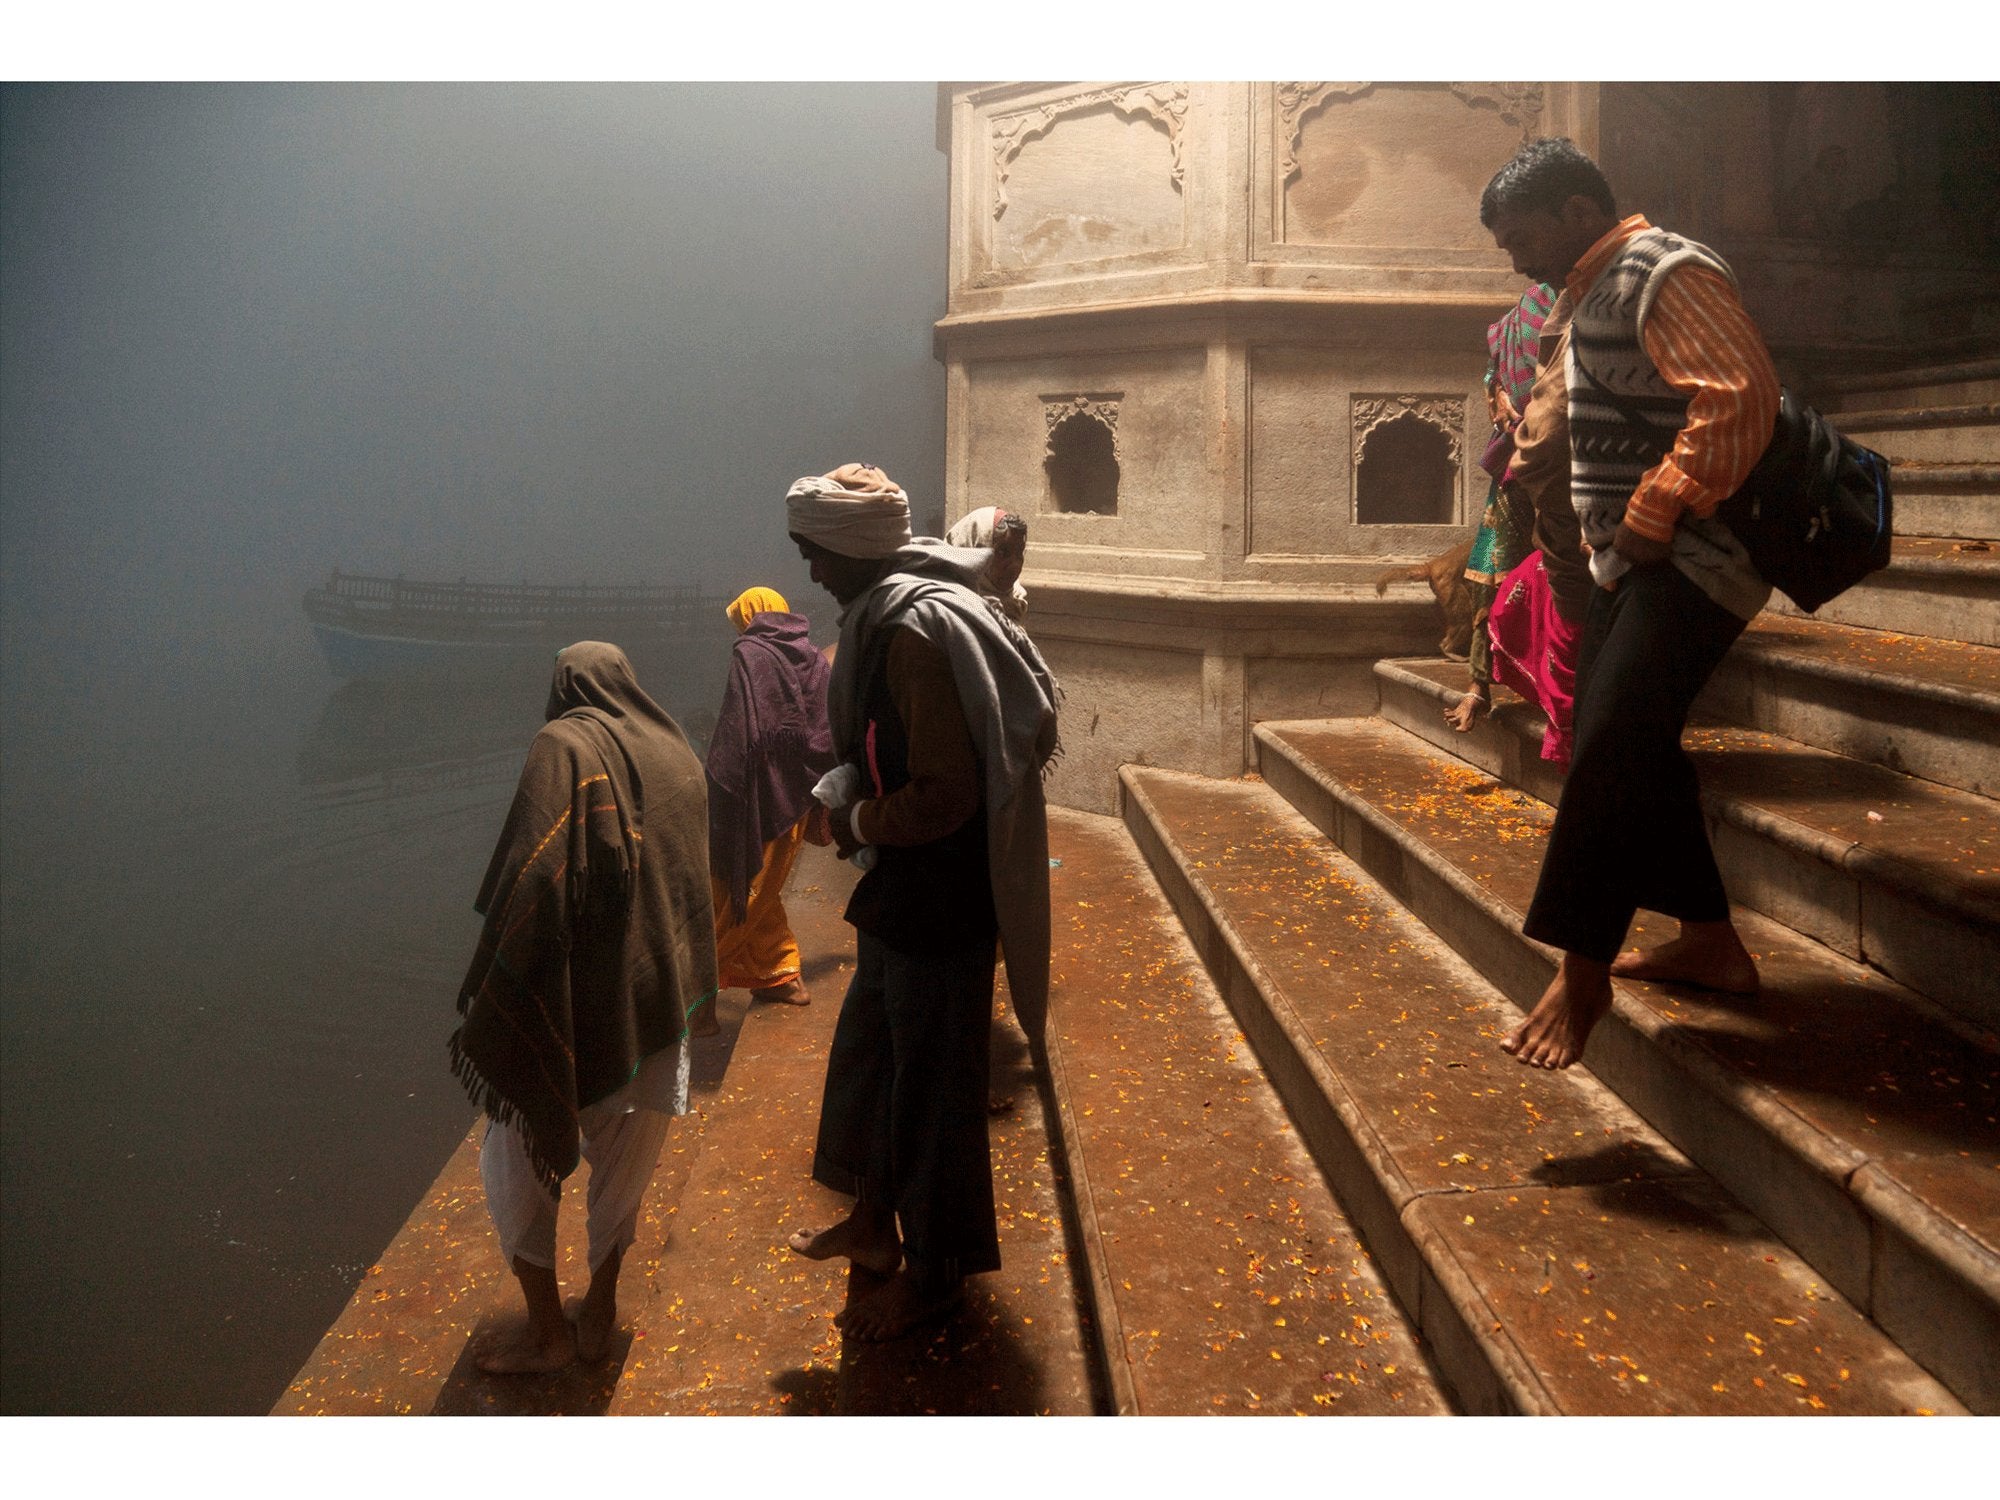 DESCENDING TO YAMUNA RIVER, INDIEN